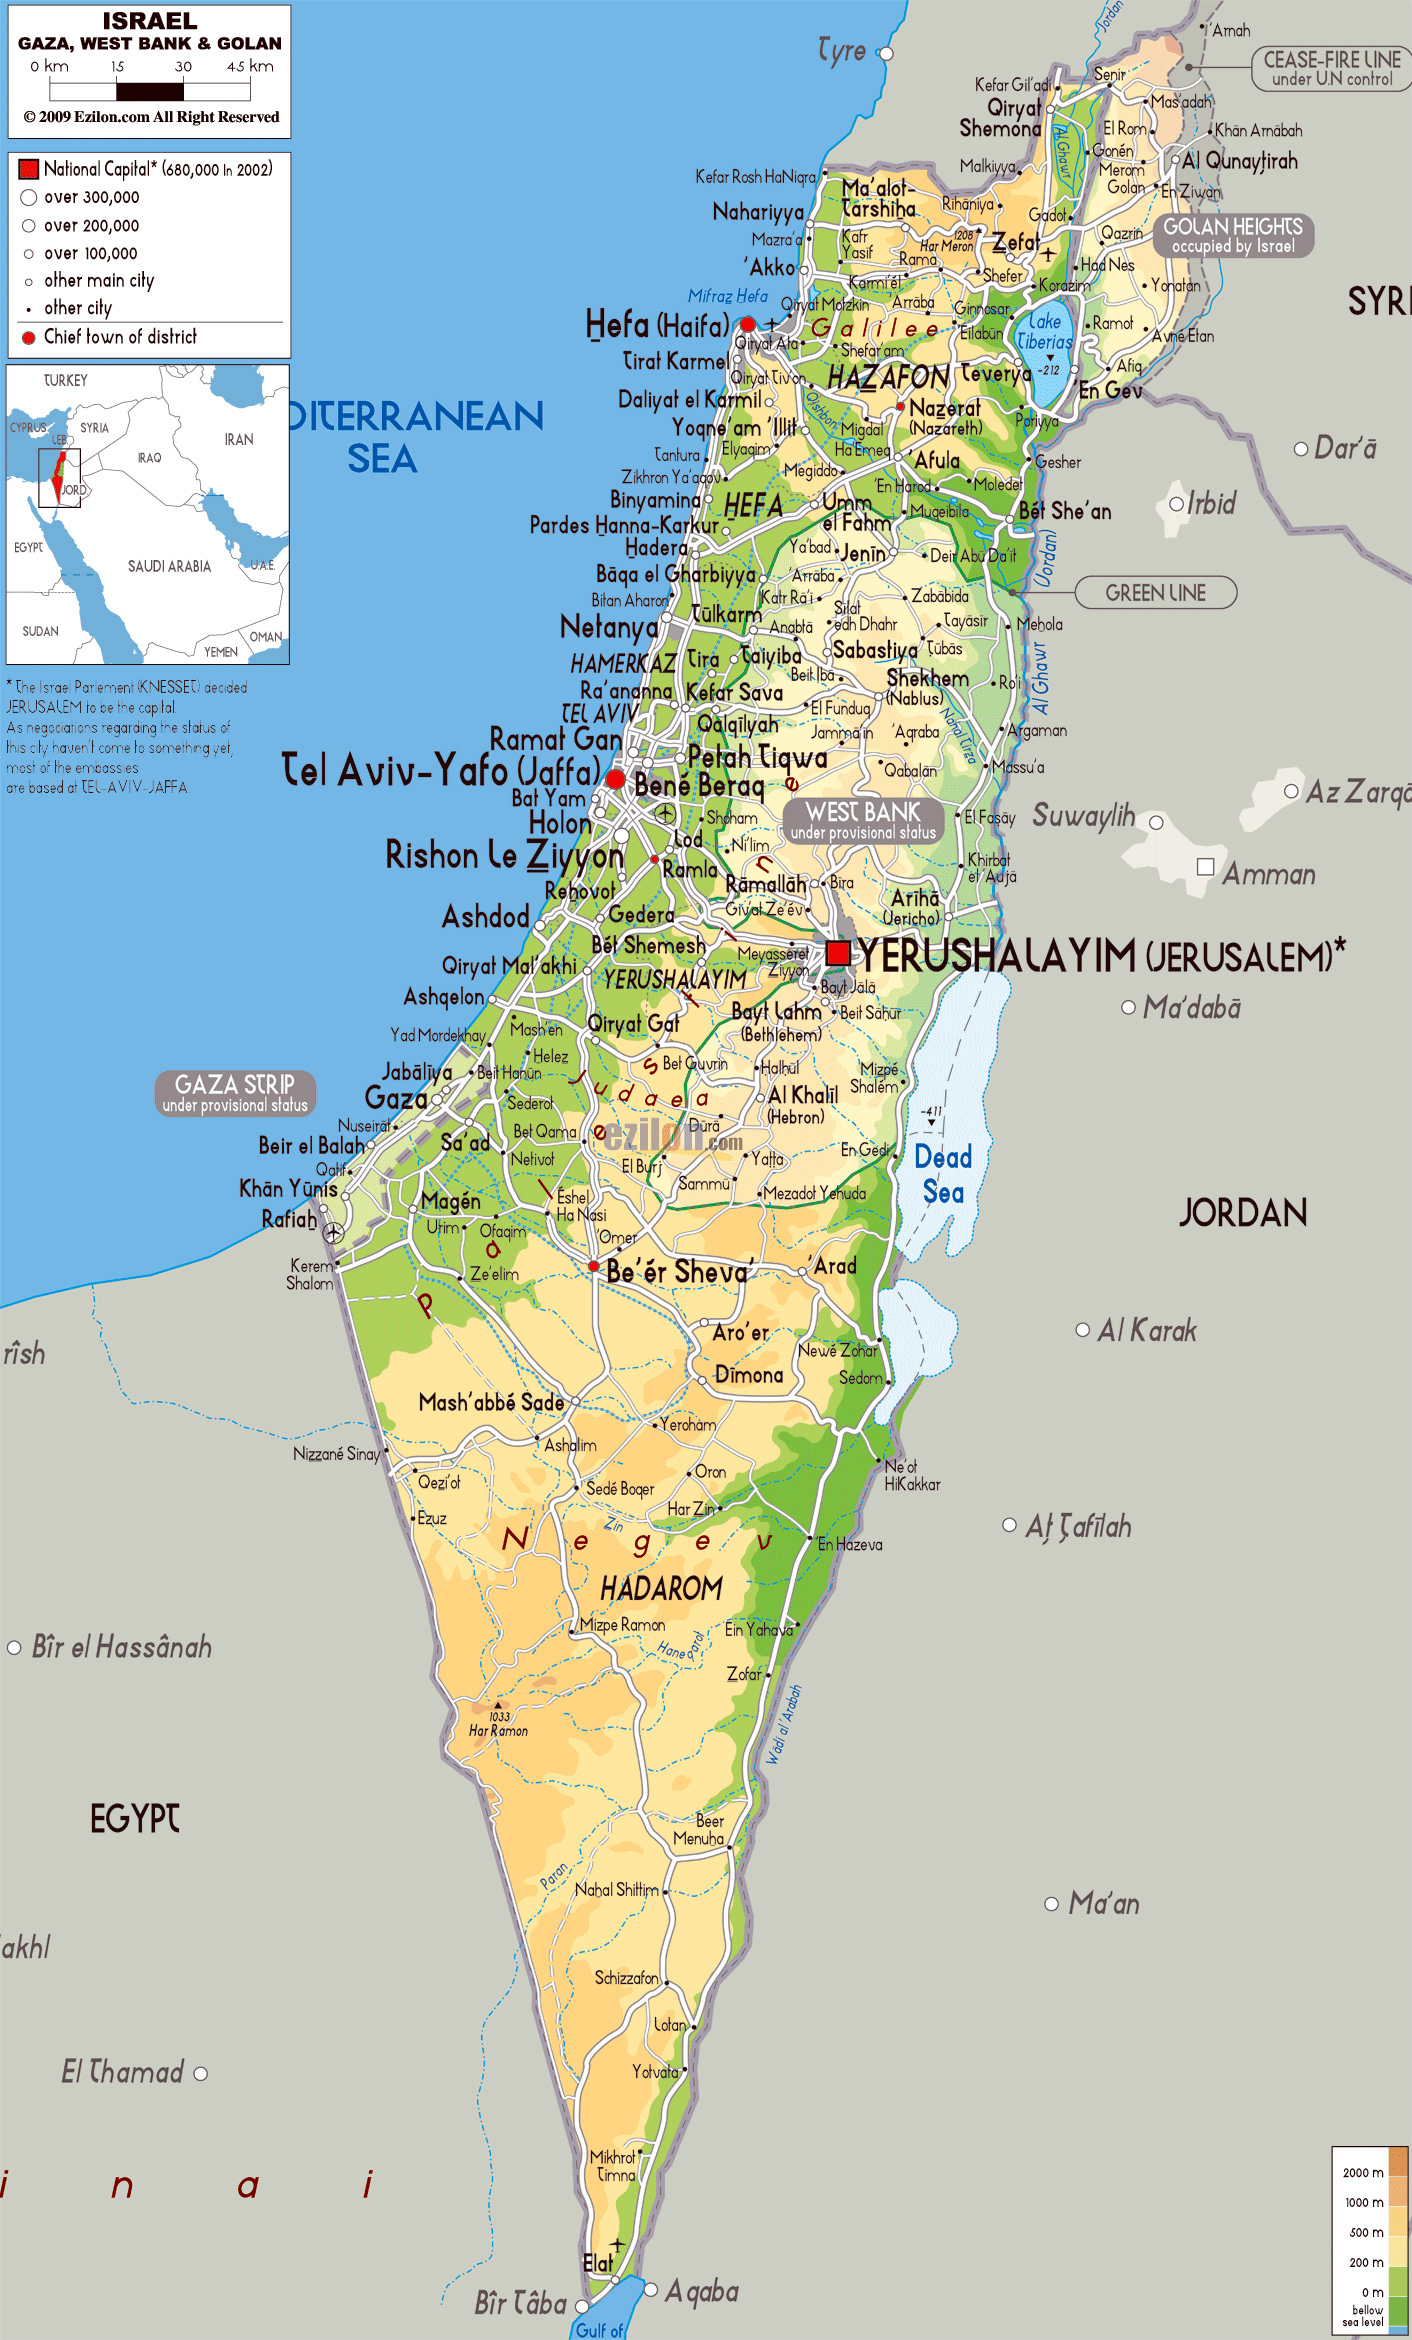 large-physical-map-of-israel-with-roads-cities-and-airports-israel